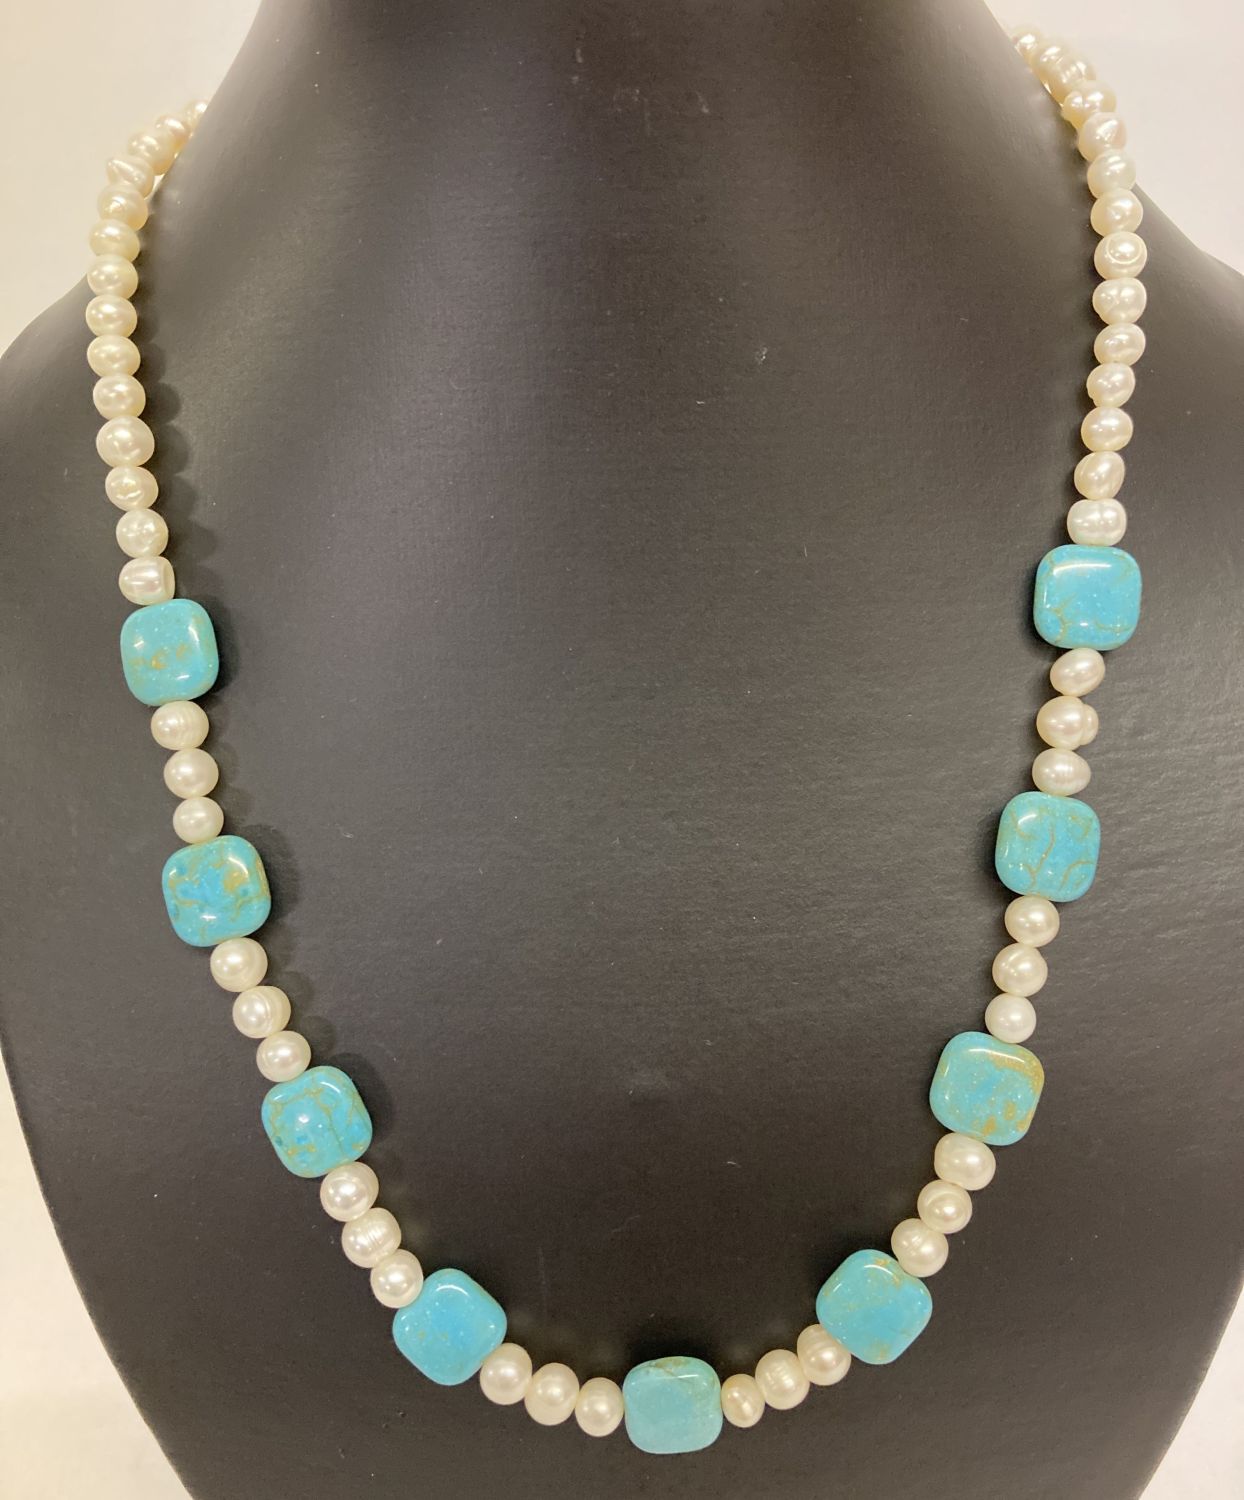 A 20" turquoise and fresh water pearl beaded necklace with pearl set clasp.